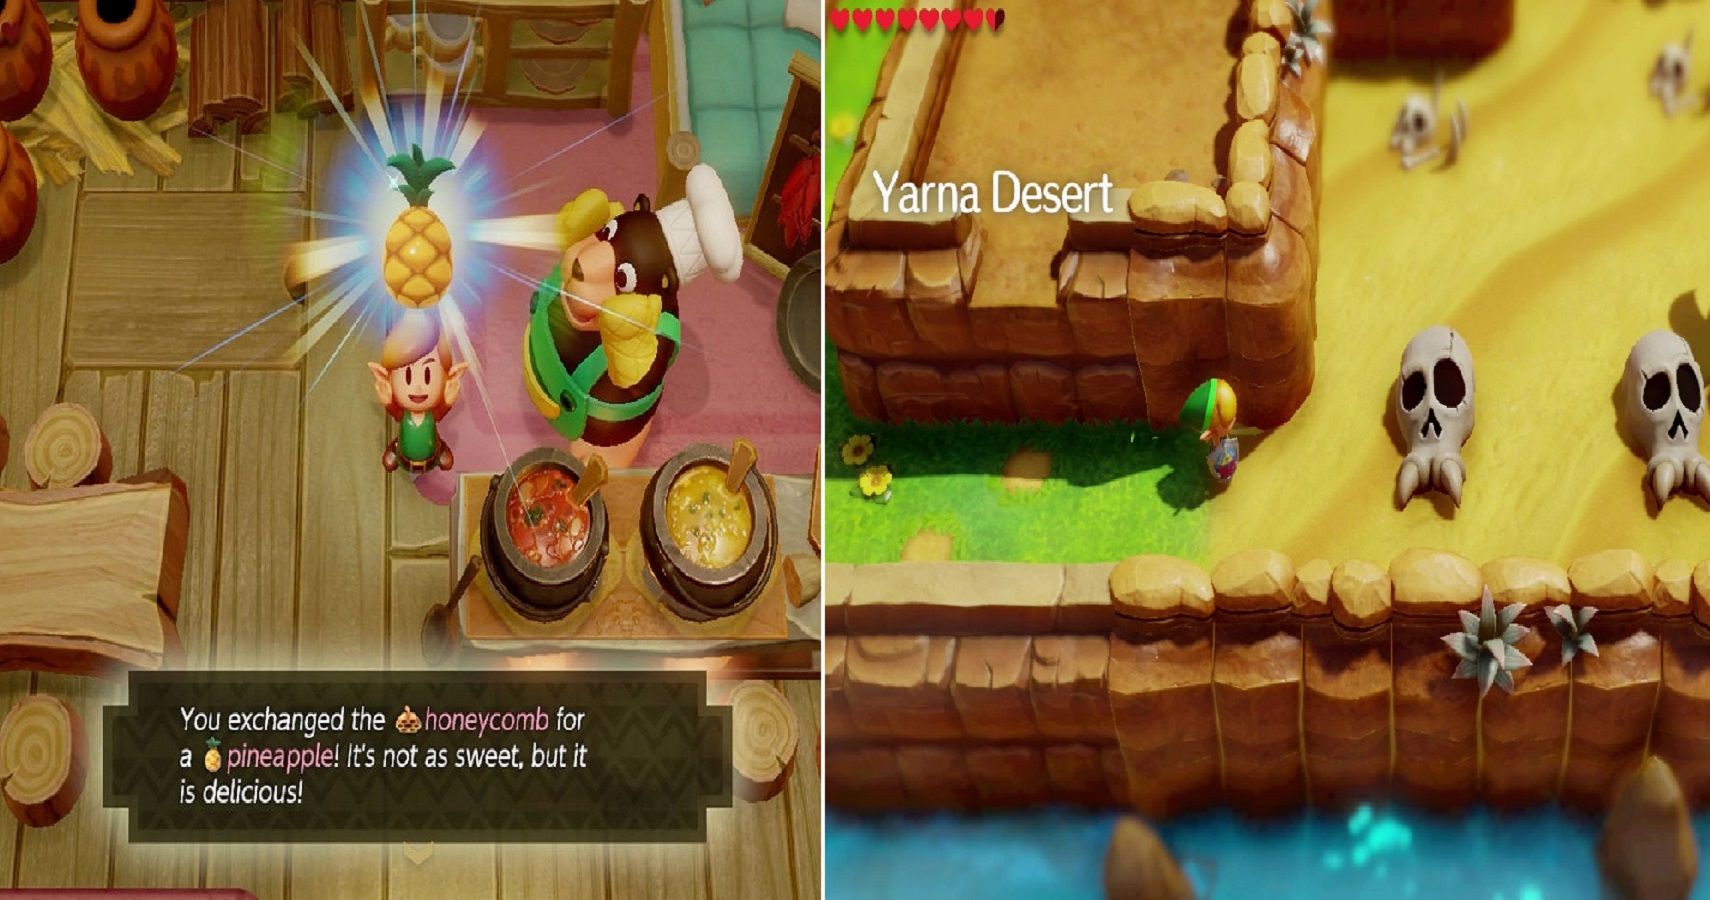 A split image of screenshots of a shop in Link's Awakening and the entrance to Yarna Desert